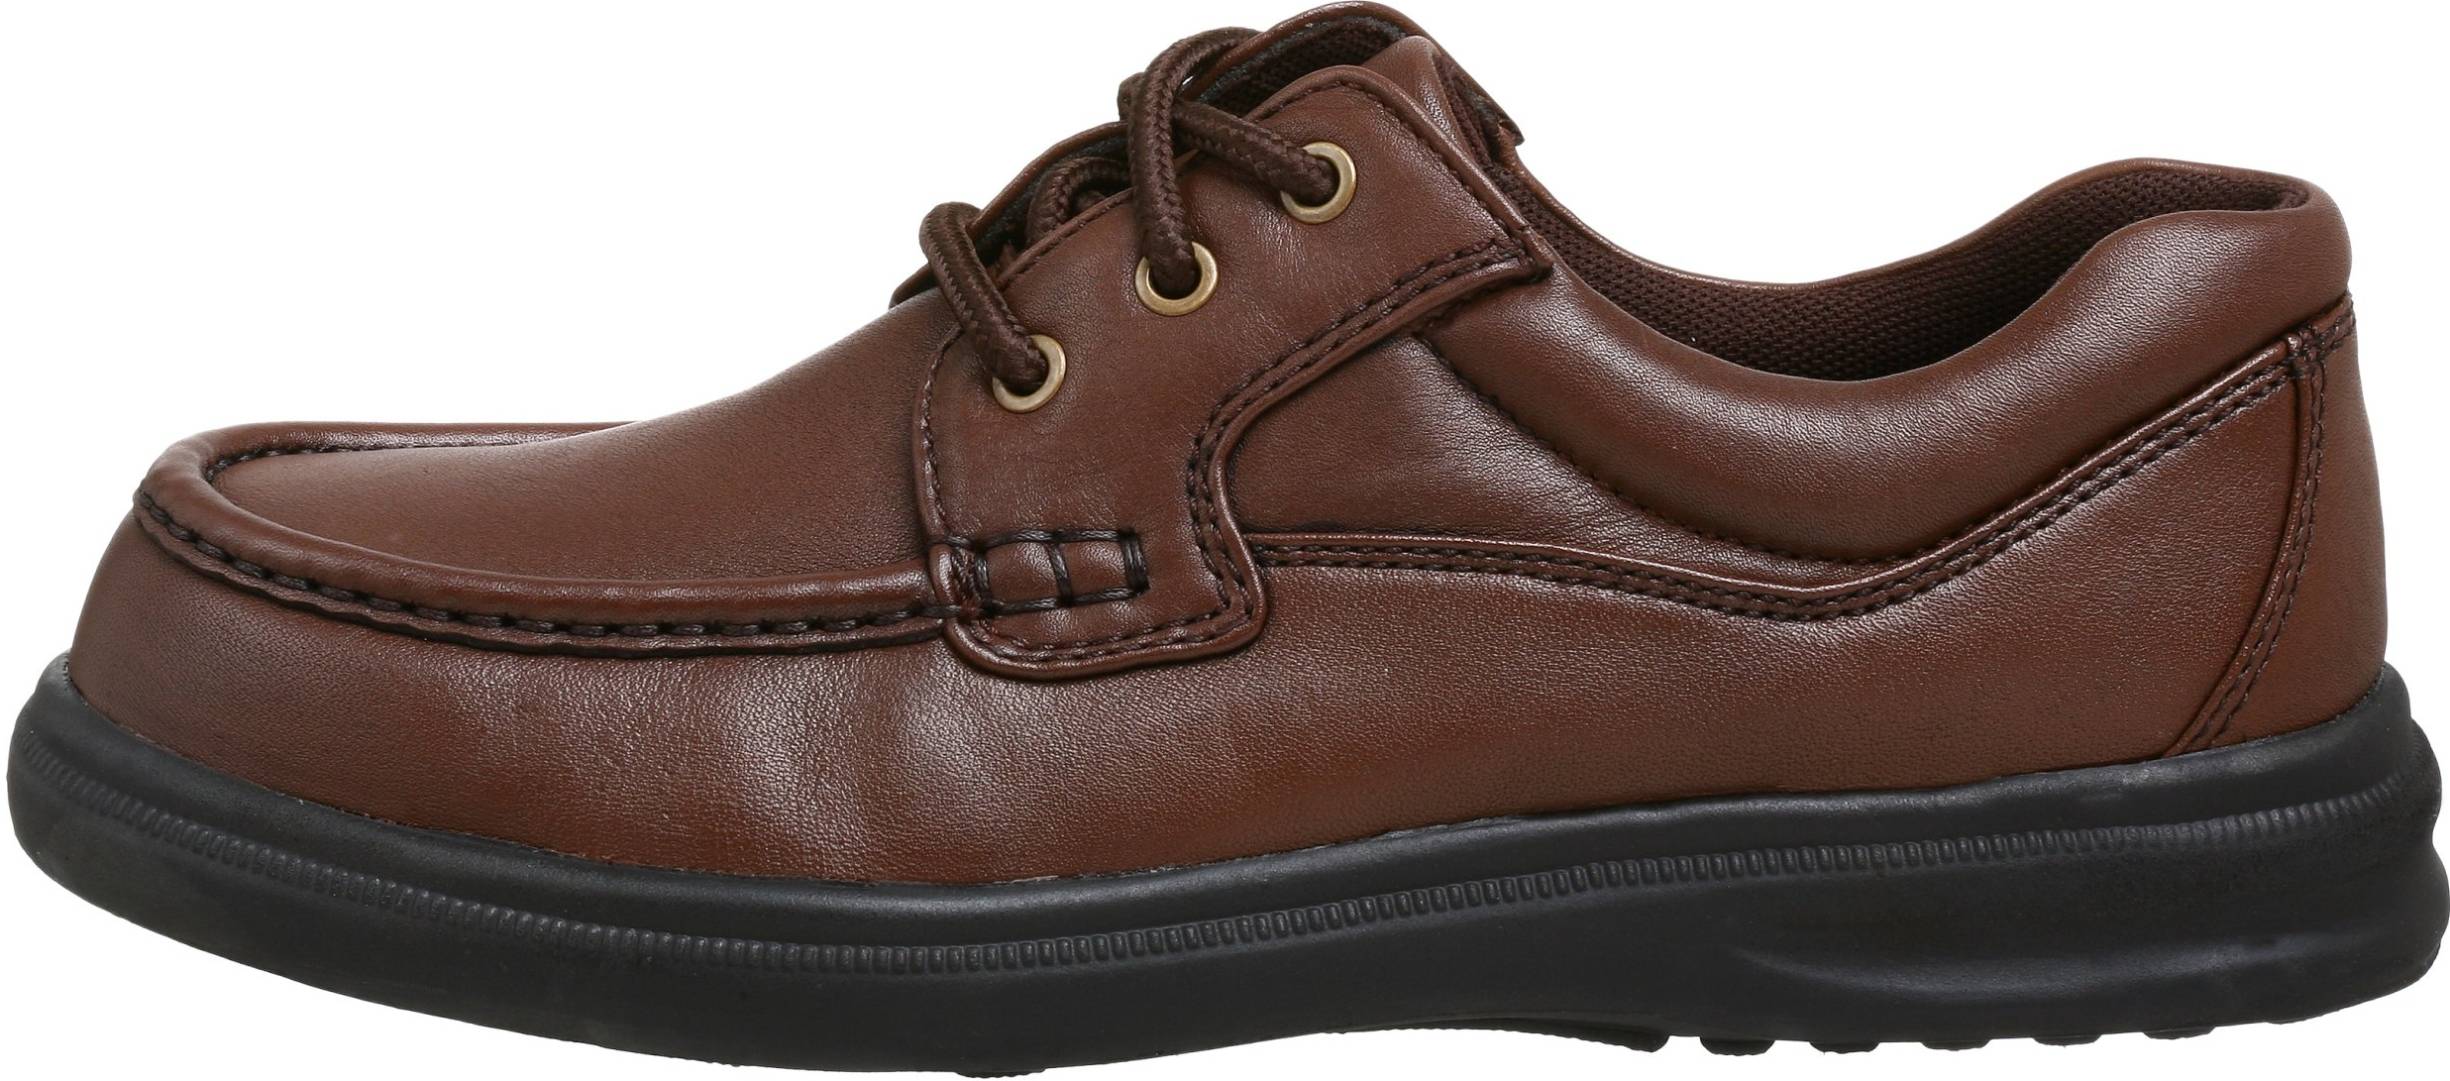 Only $30 + Review of Hush Puppies Gus 